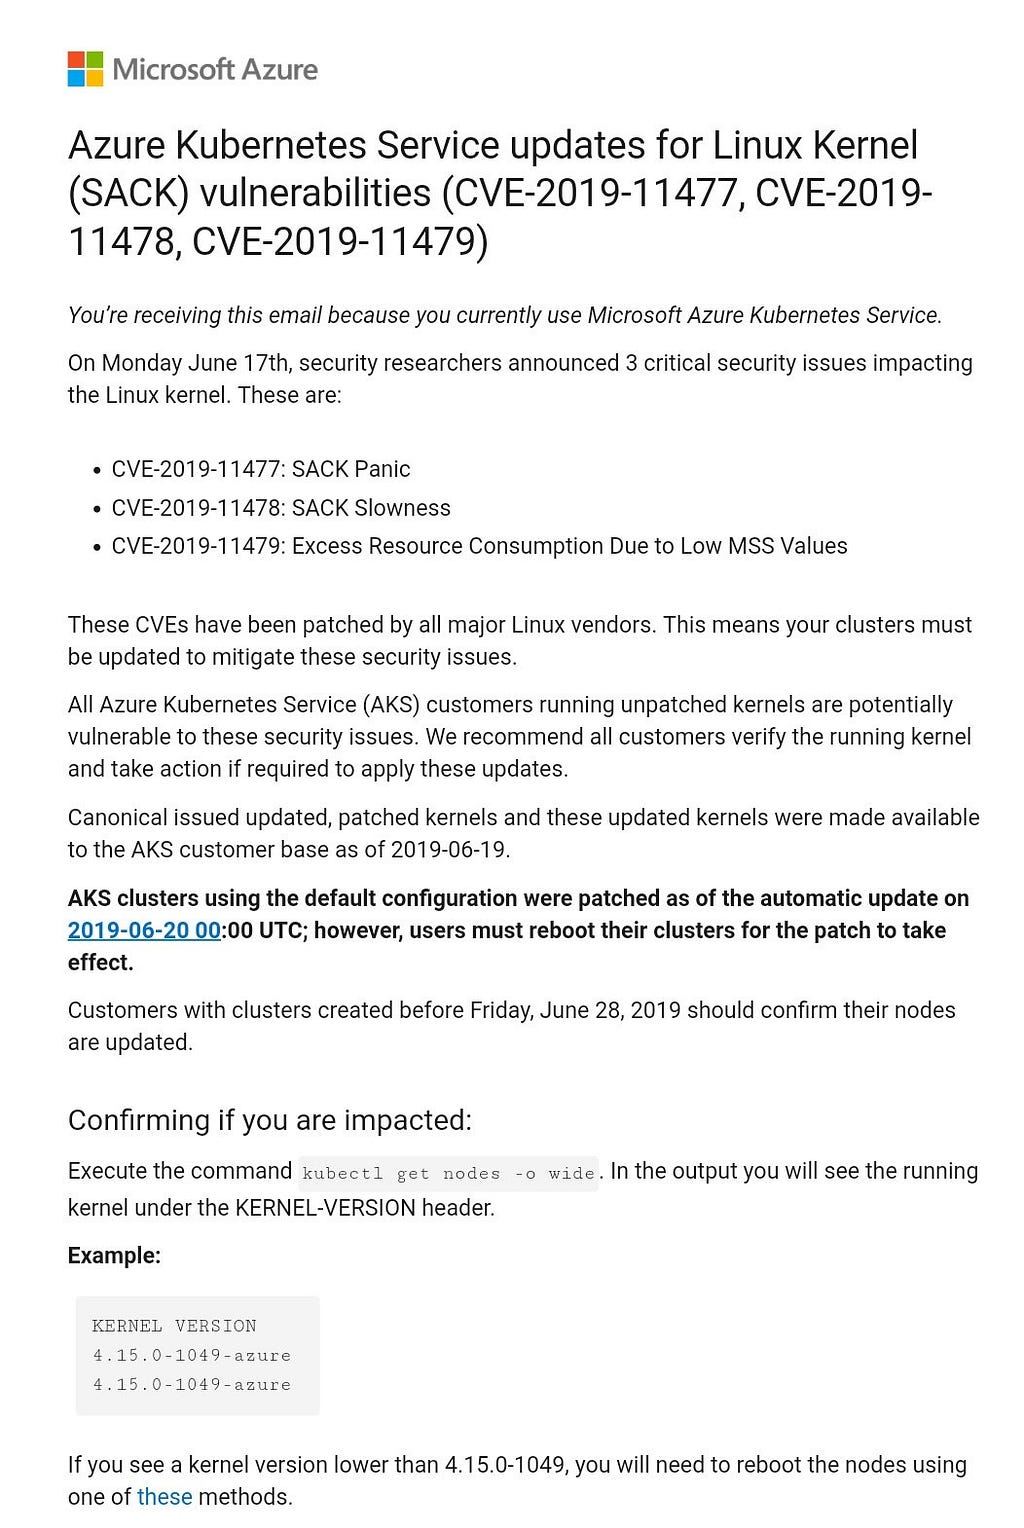 The Microsoft Azure email explaining that I had to reboot my clusters